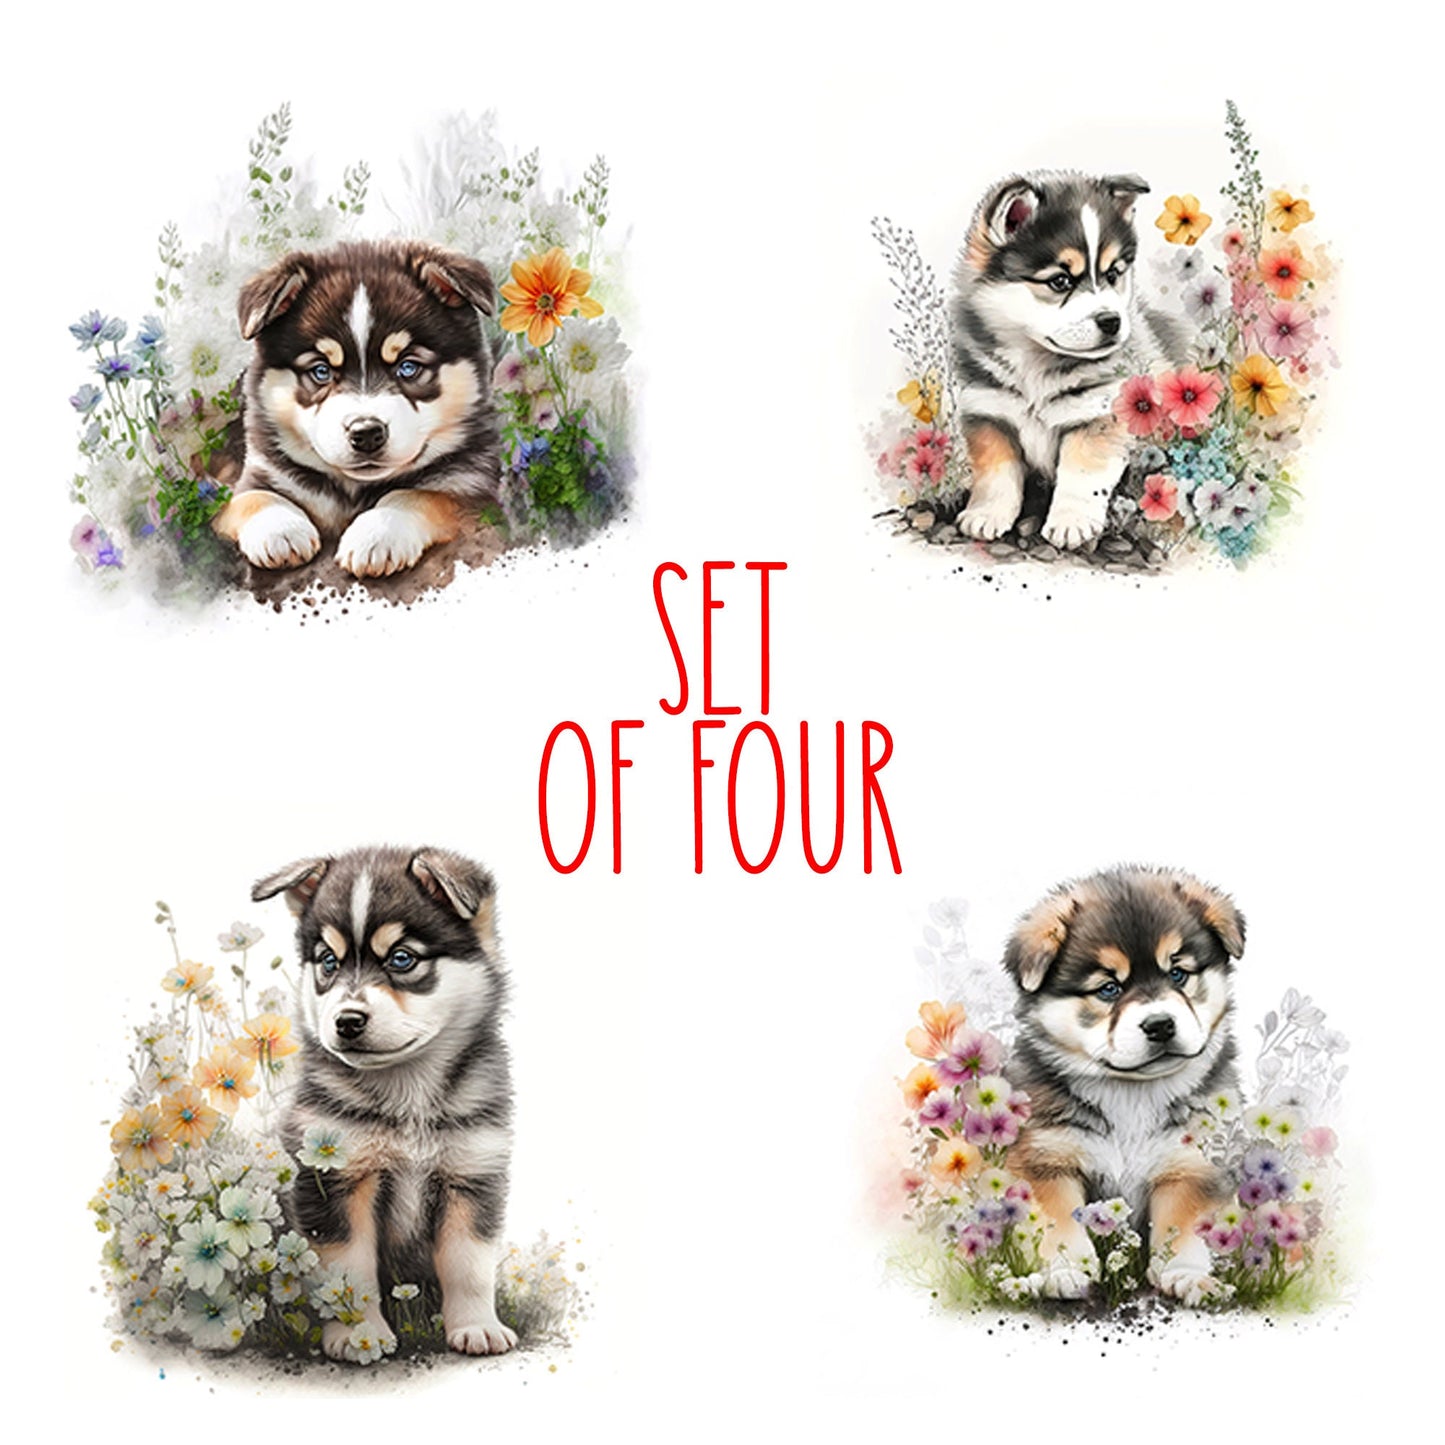 Cute Malamute Puppy Art Decorative Ceramic Tile Set with Optional Easel Back - Available in 4 sizes - Set of 4